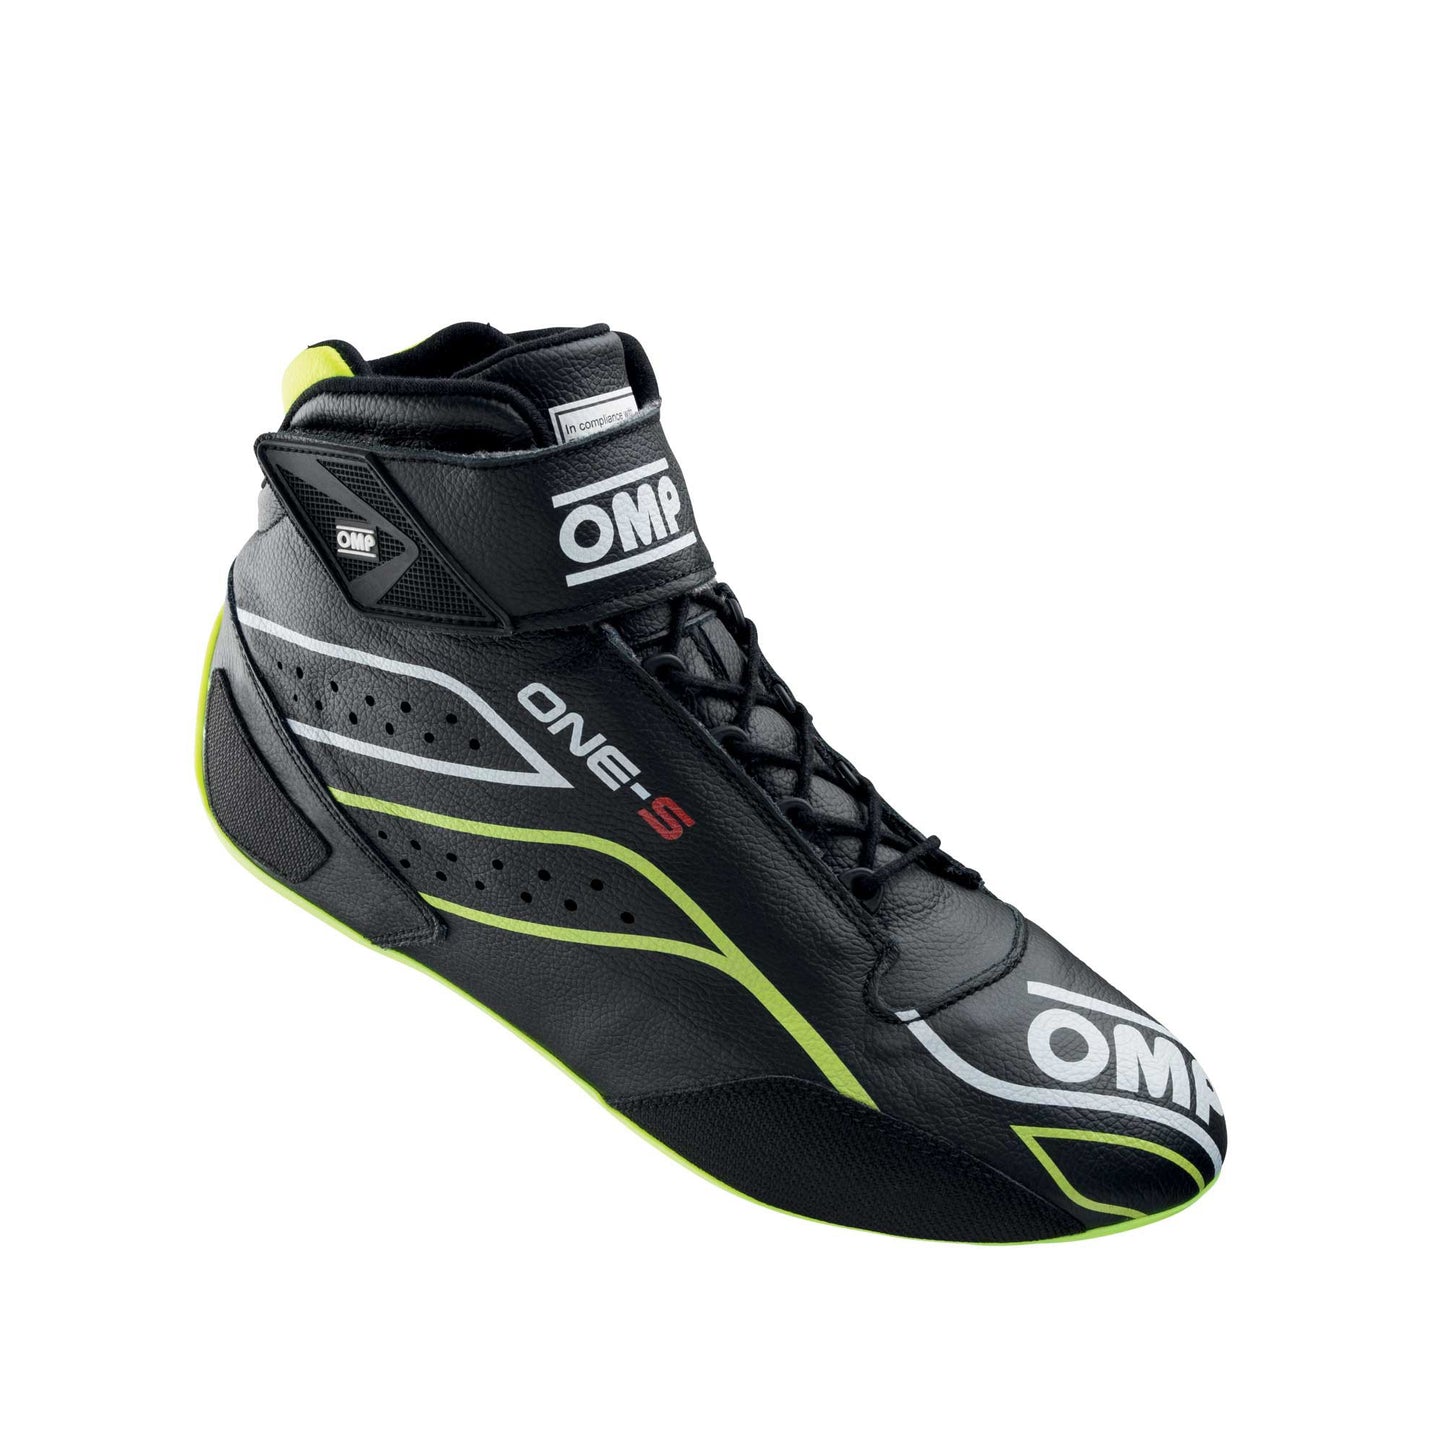 OMP ONE S RACE BOOTS